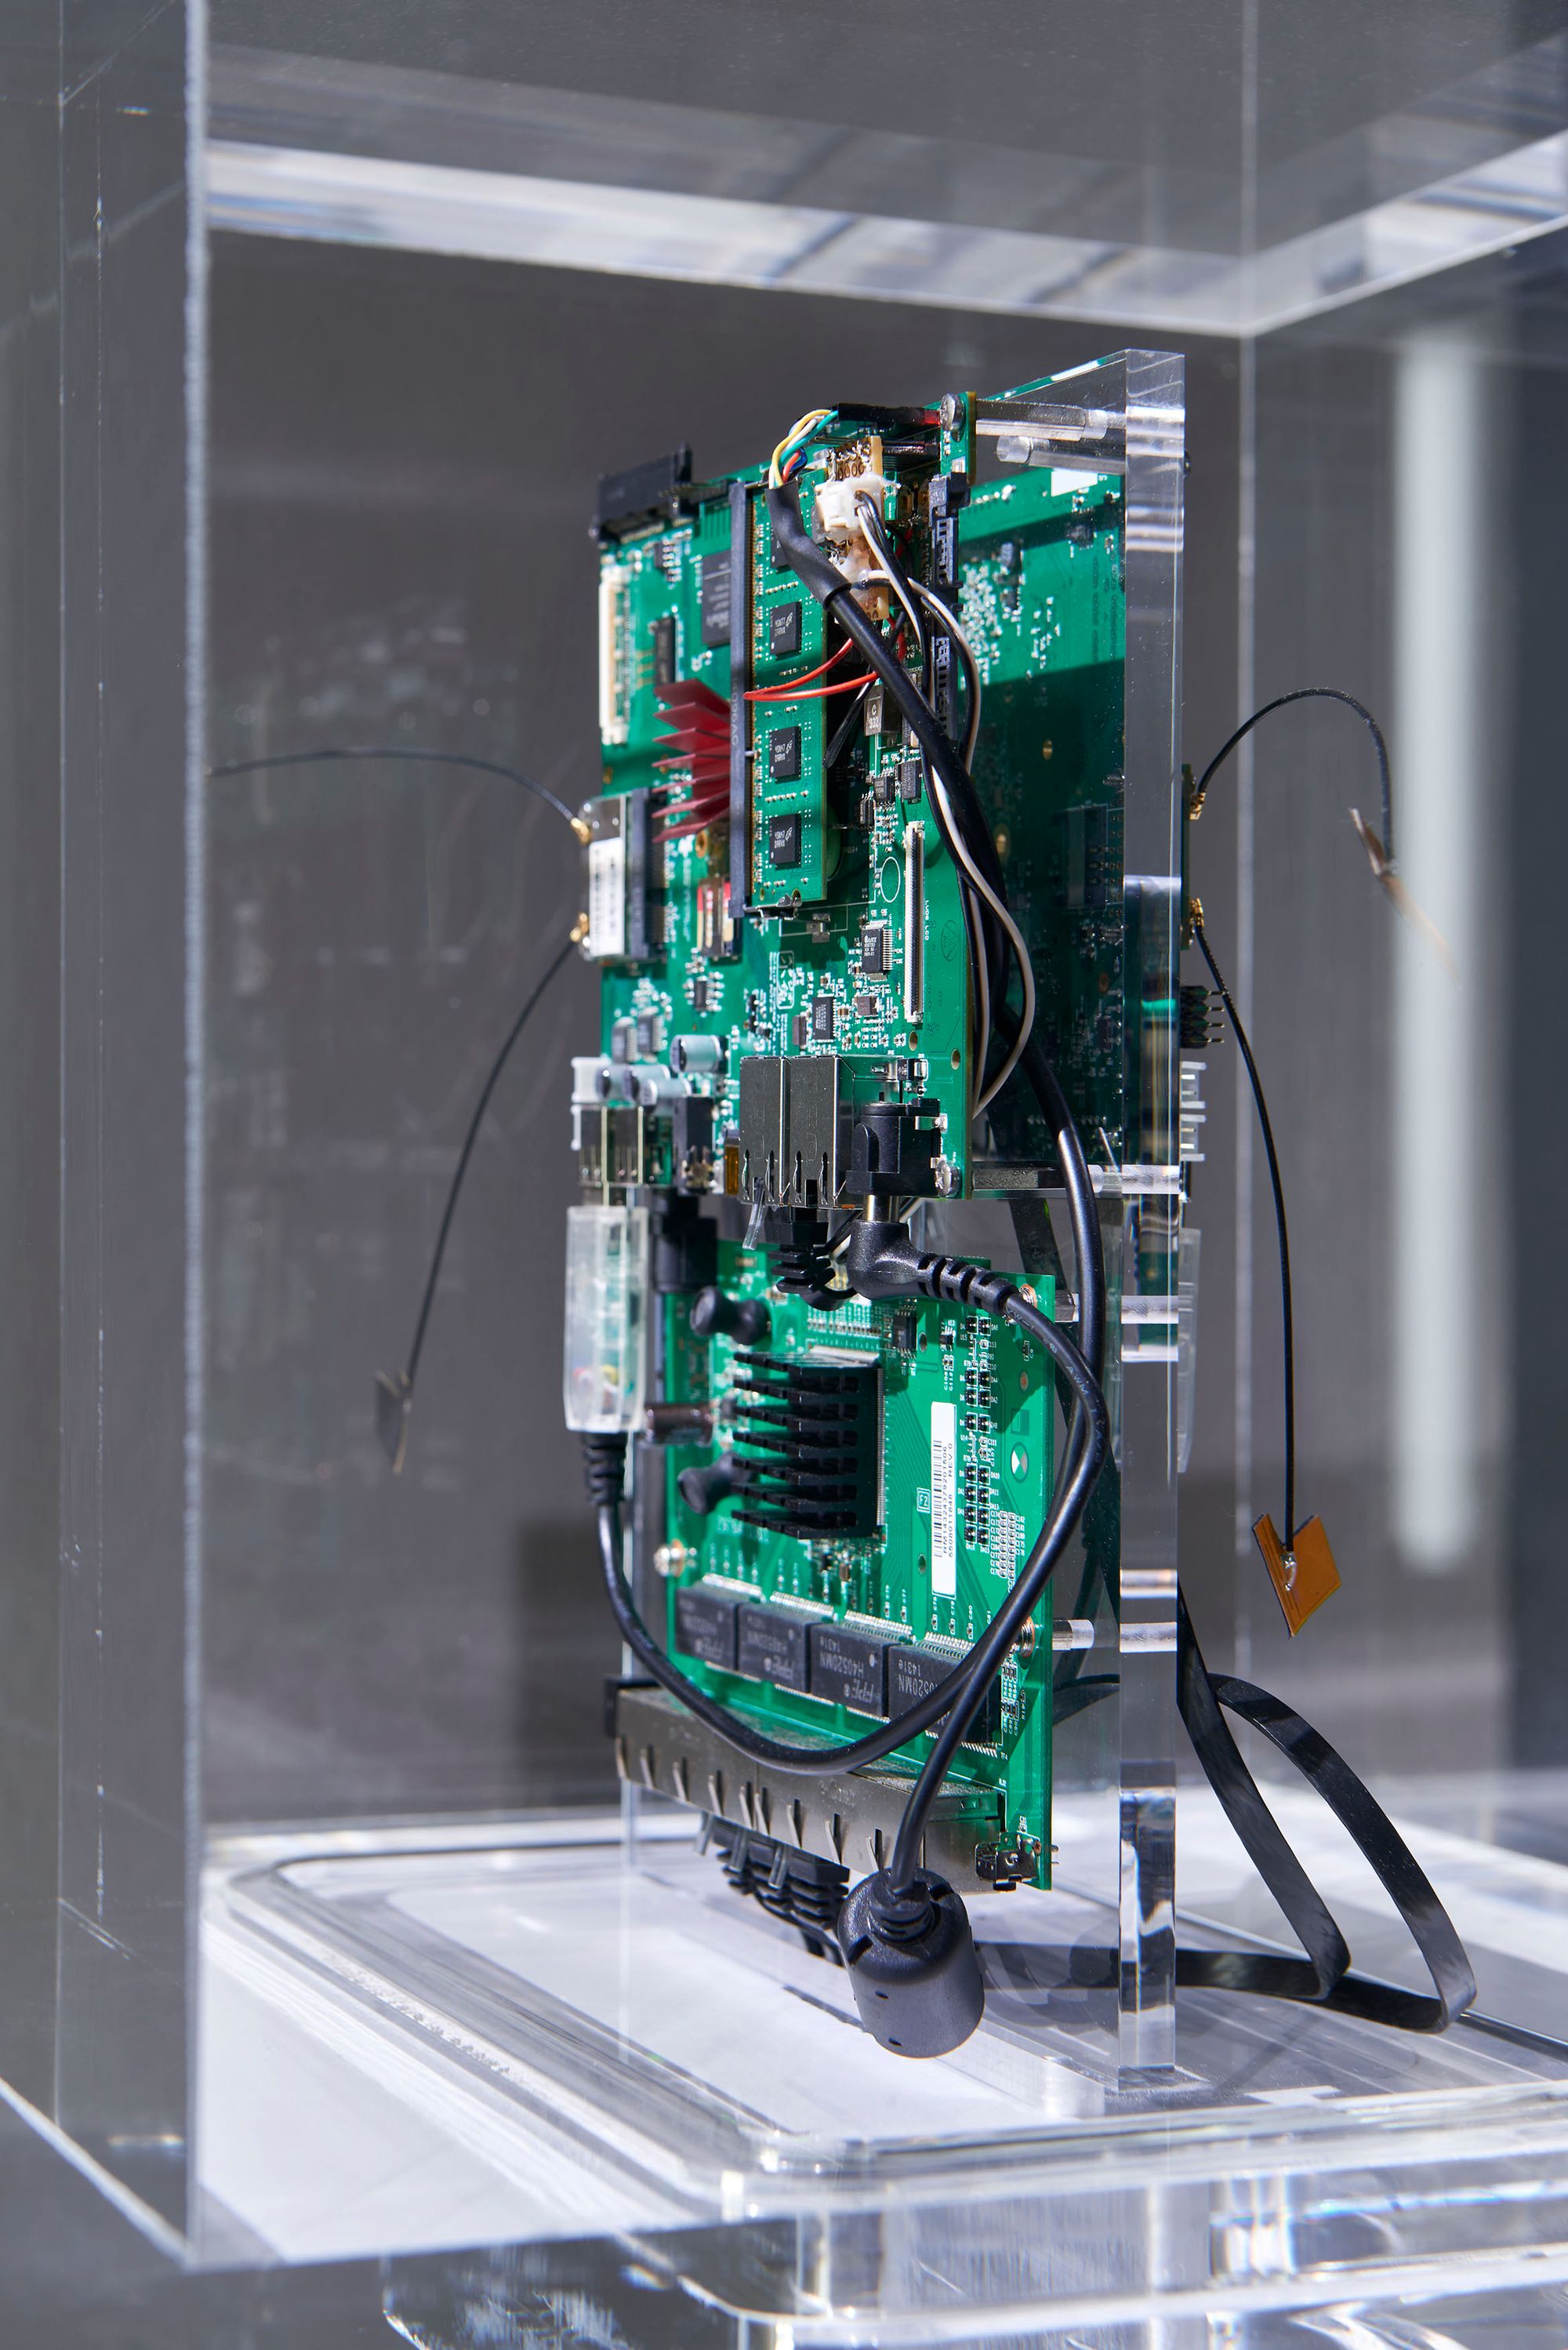 A sculpture that resembles a computer motherboard is displayed in a clear vitrine box.